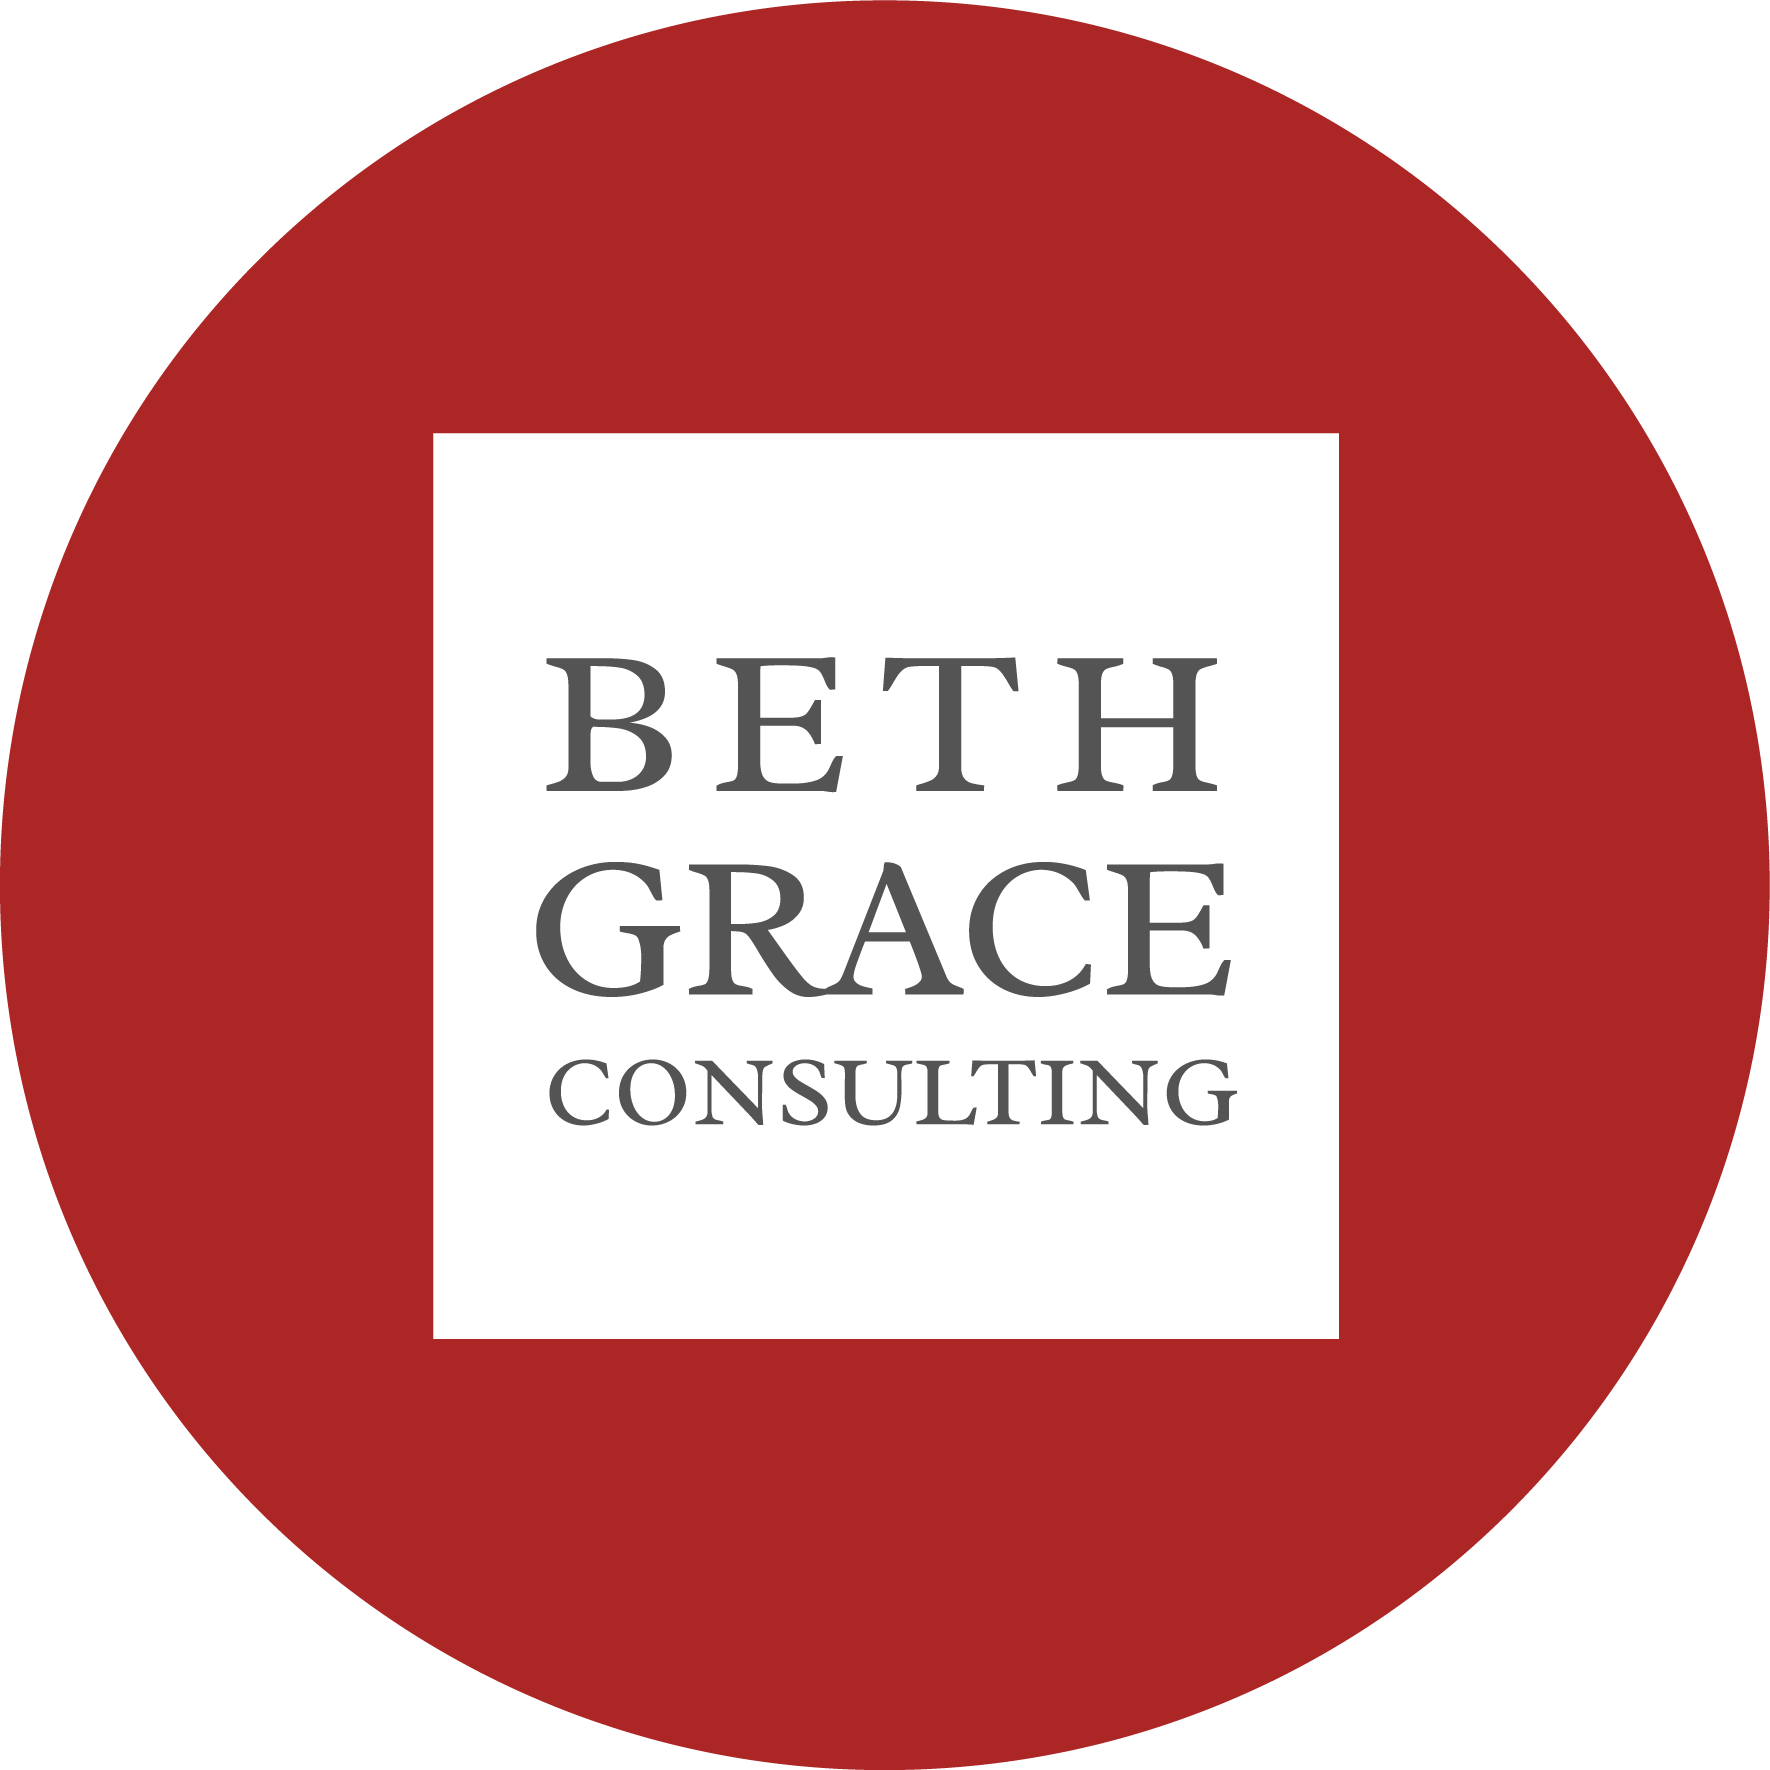 Beth Grace Consulting